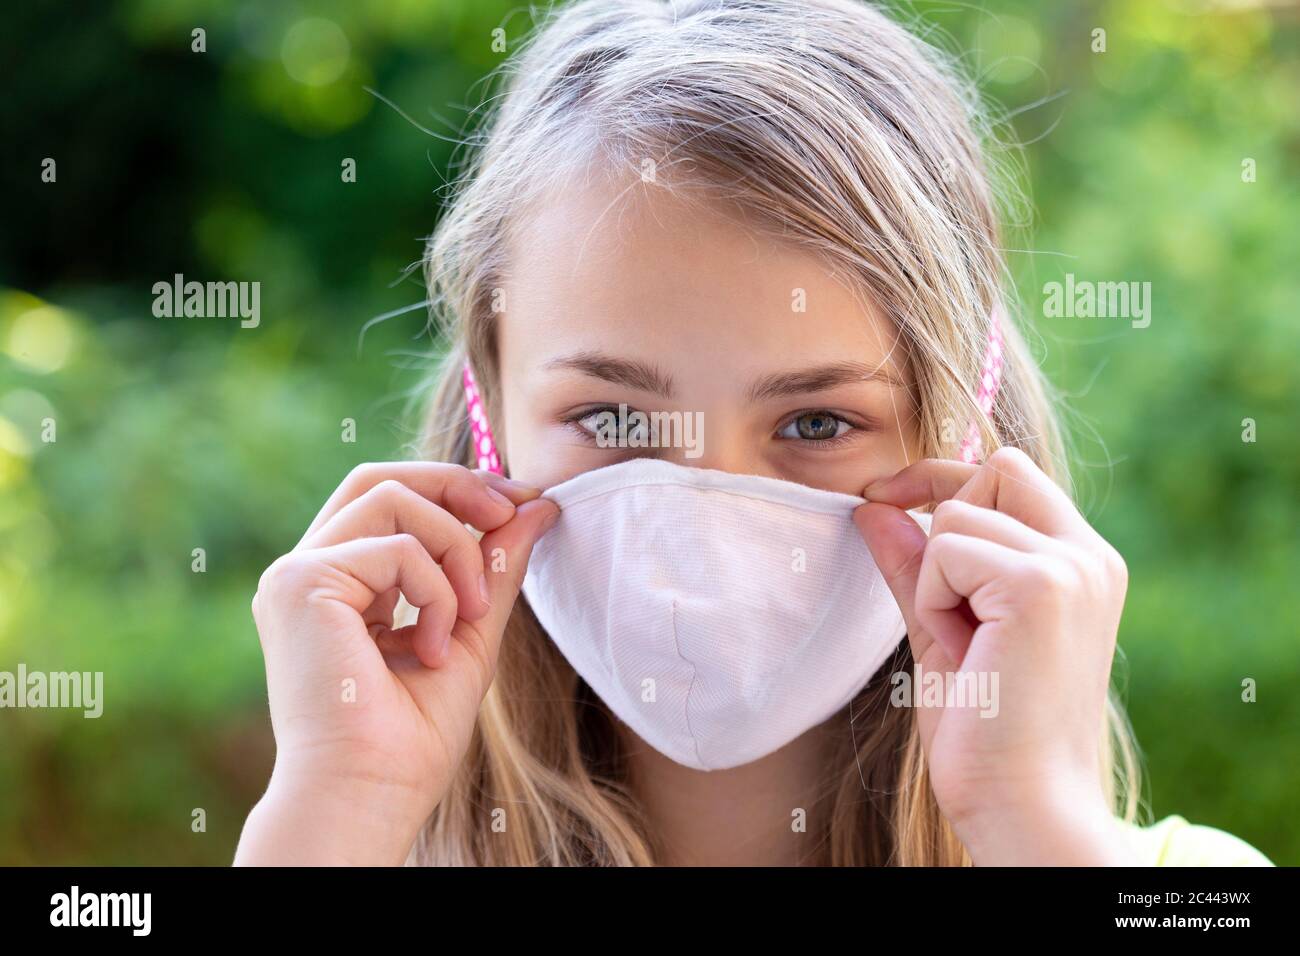 Close-up of girl wearing face mask Stock Photo